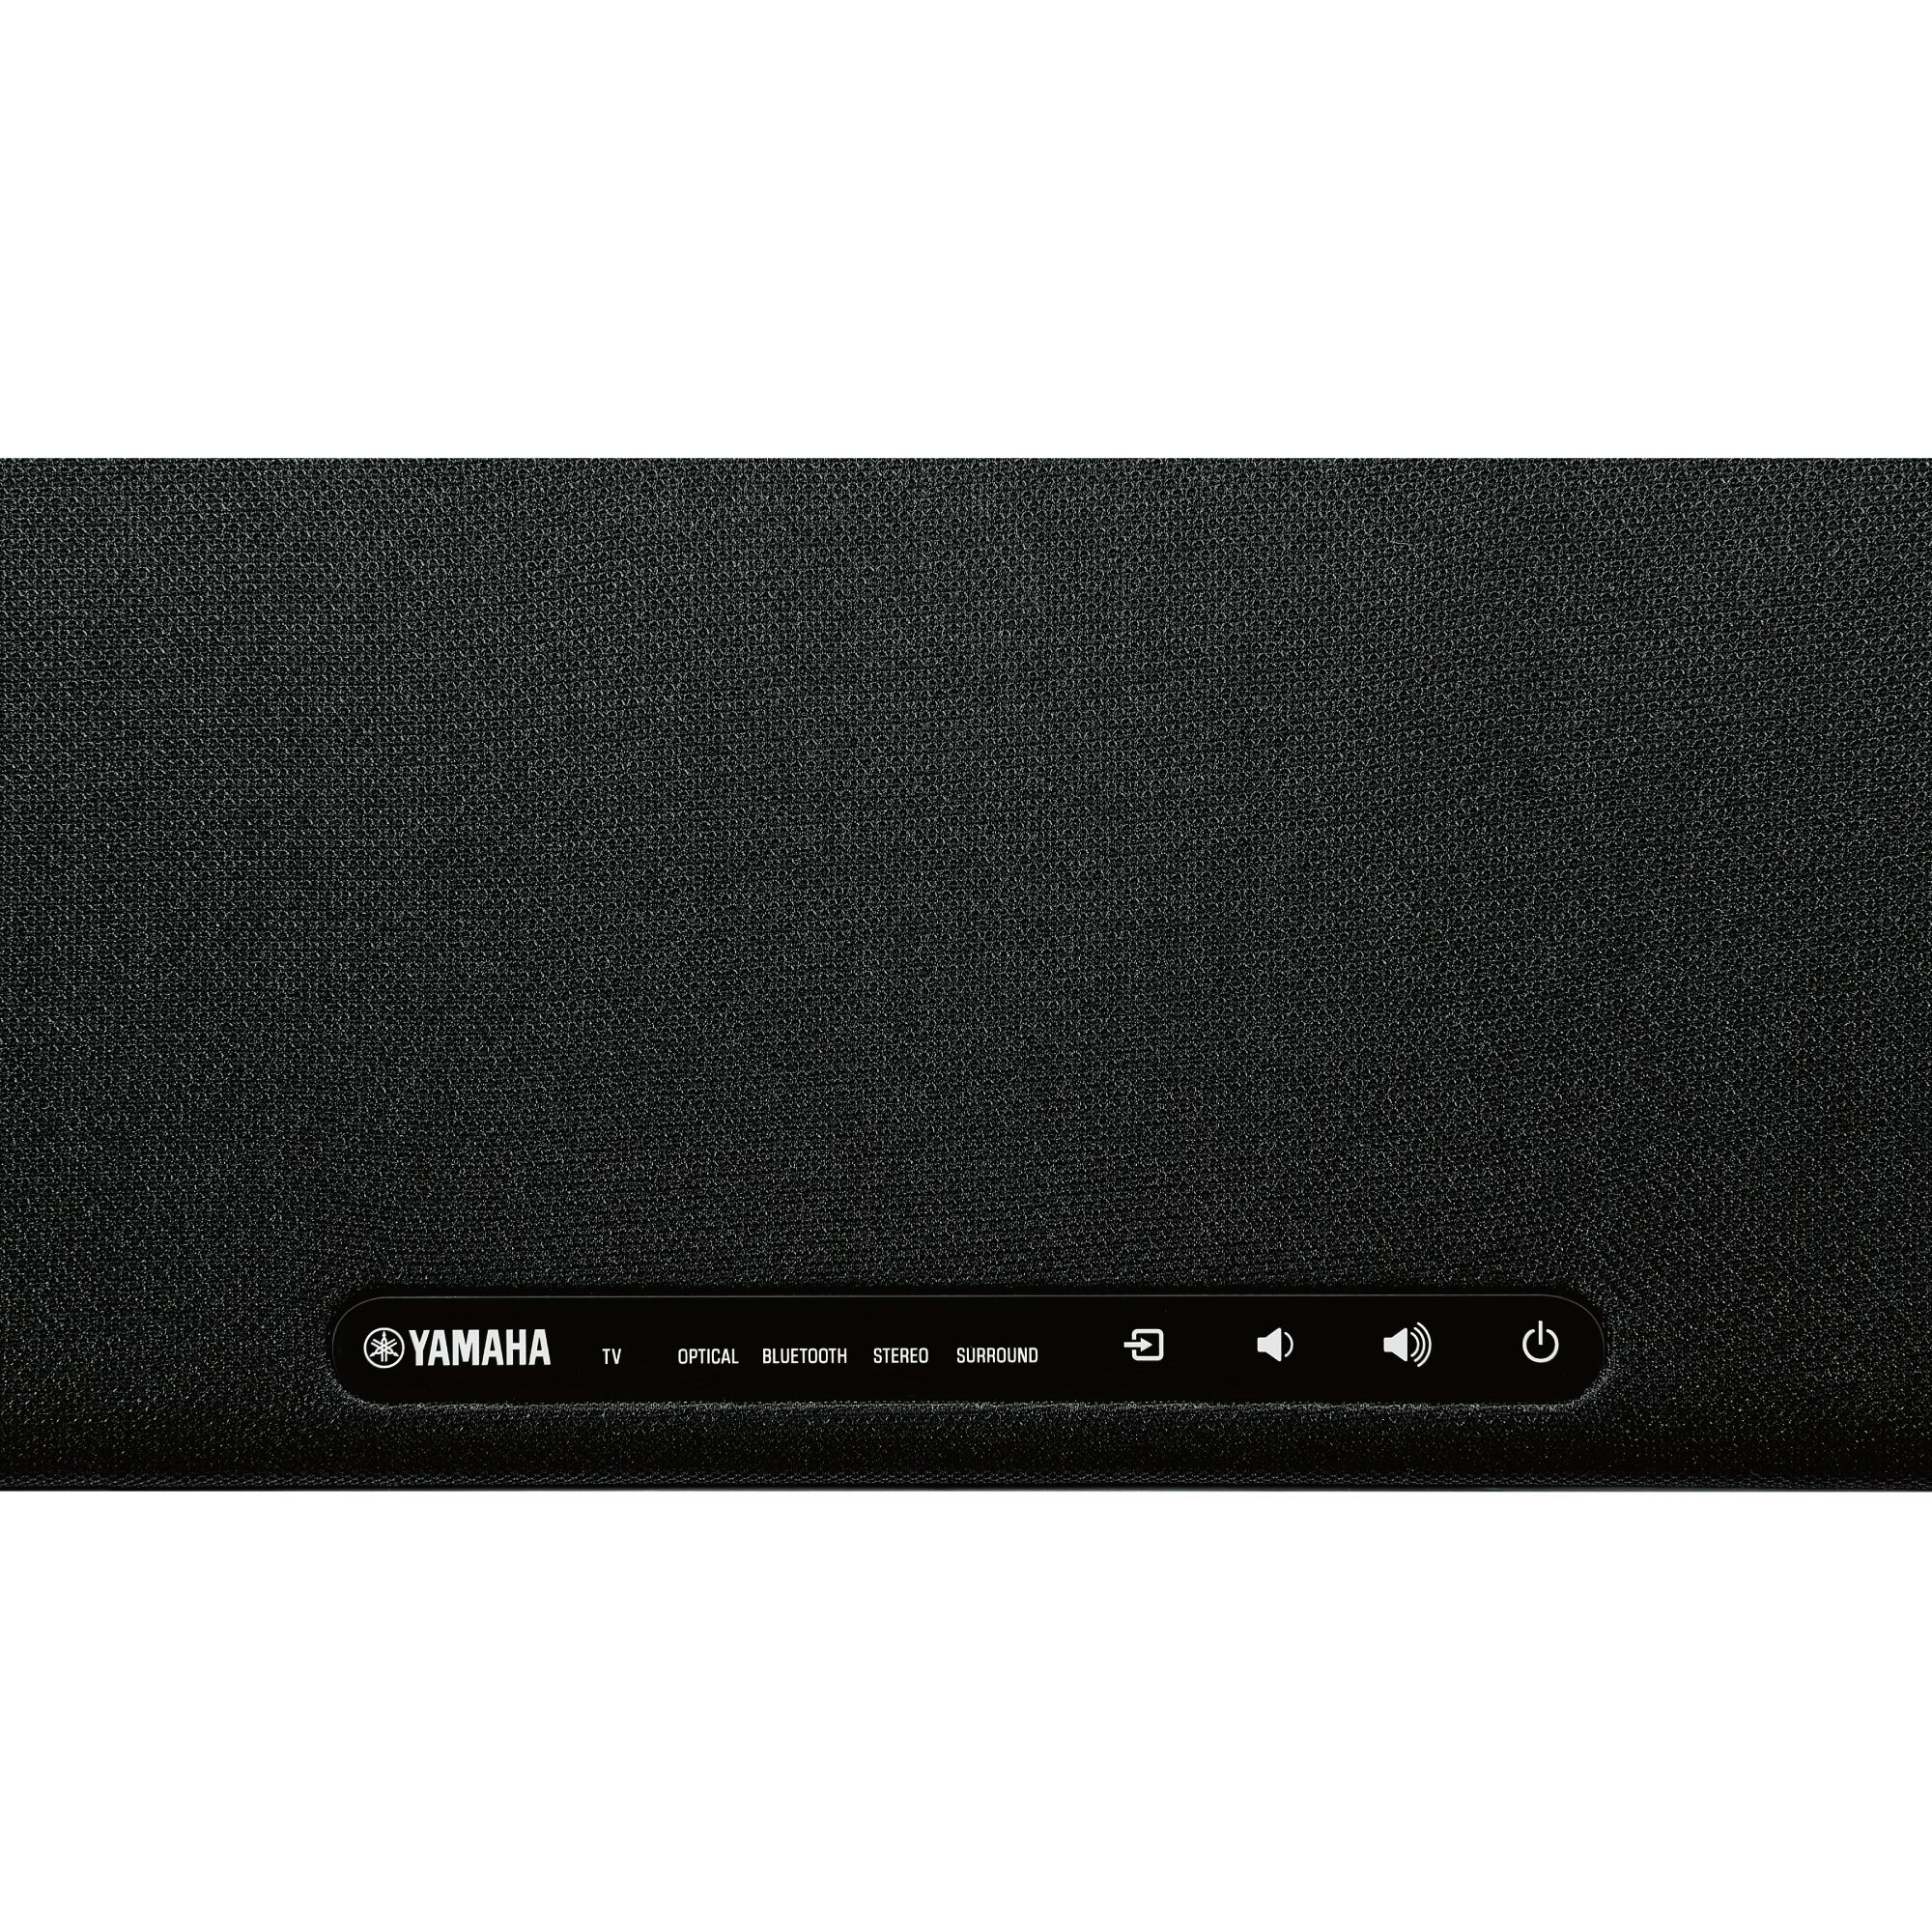 Yamaha SR-B20A Sound Bar with Built in Subwoofer